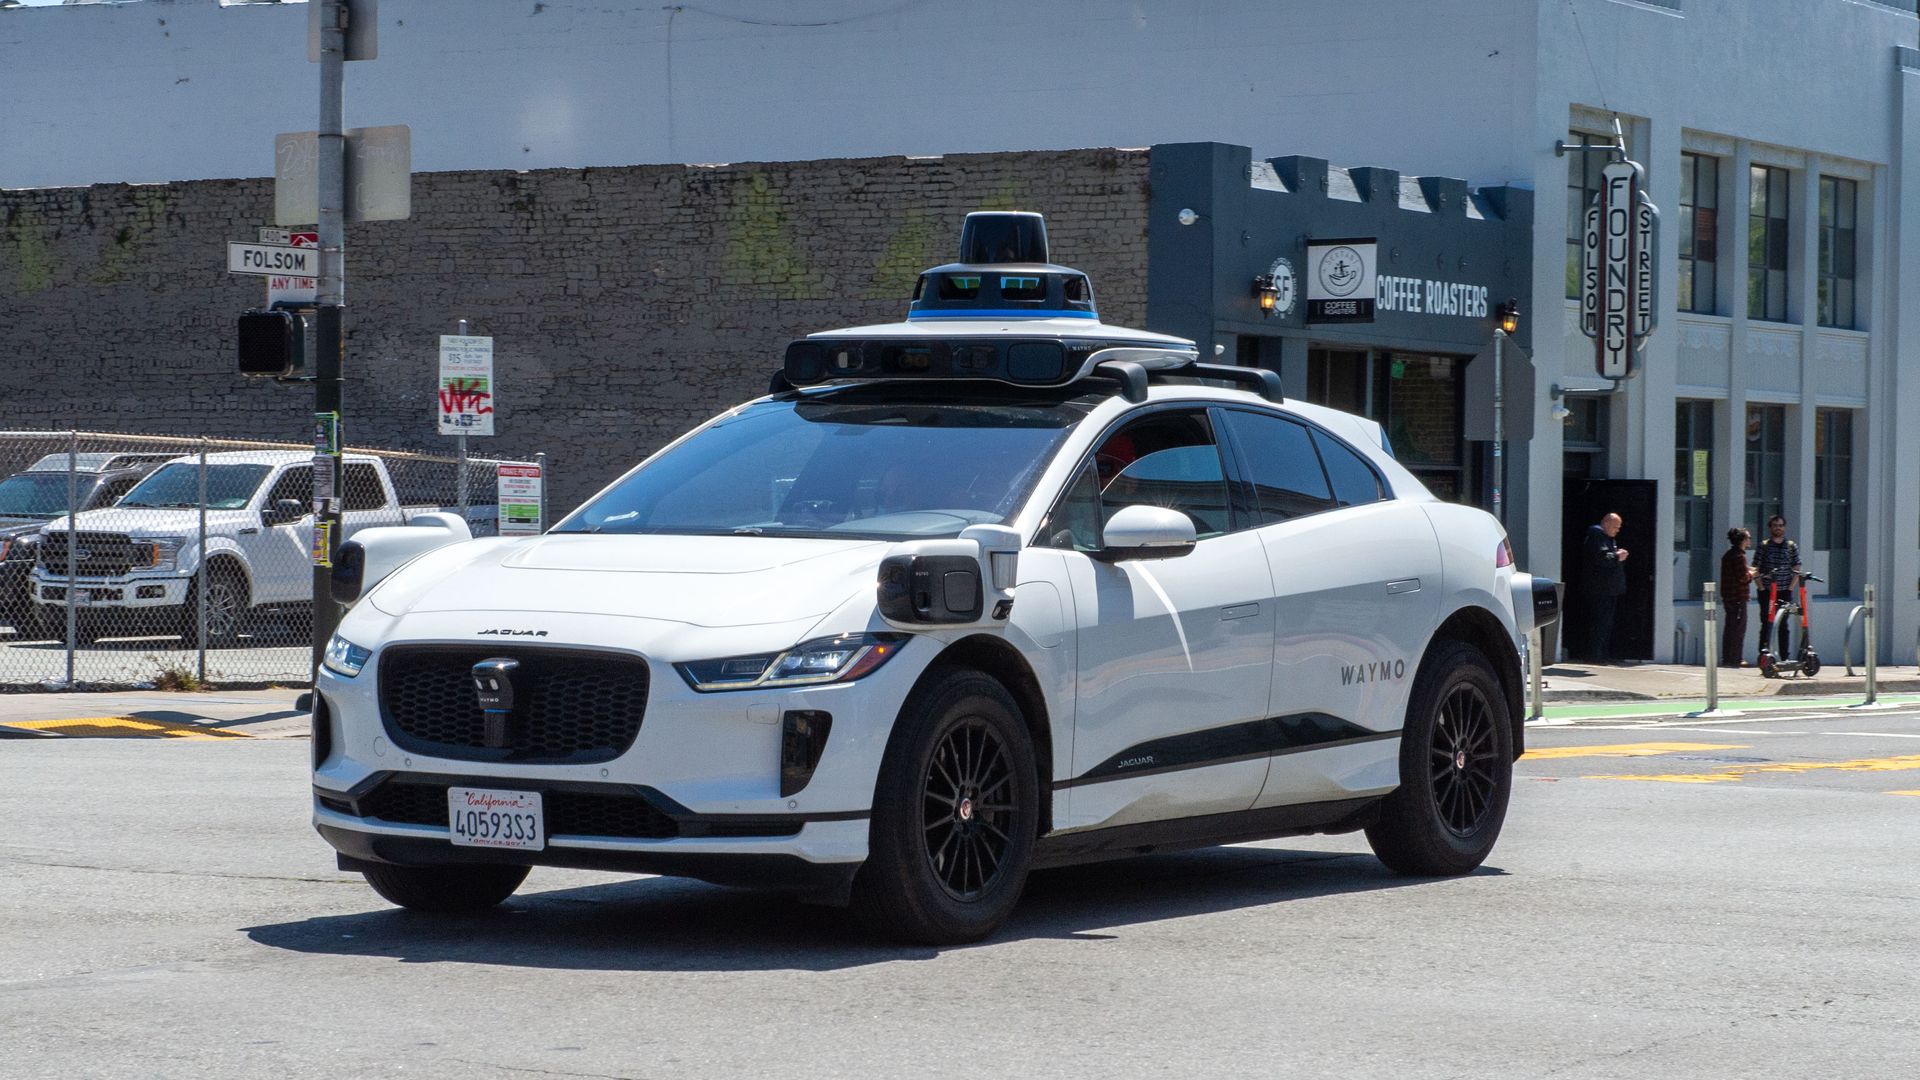 A white self-driving car from Waymo, outfitted with sensors, drives on Folsom street 